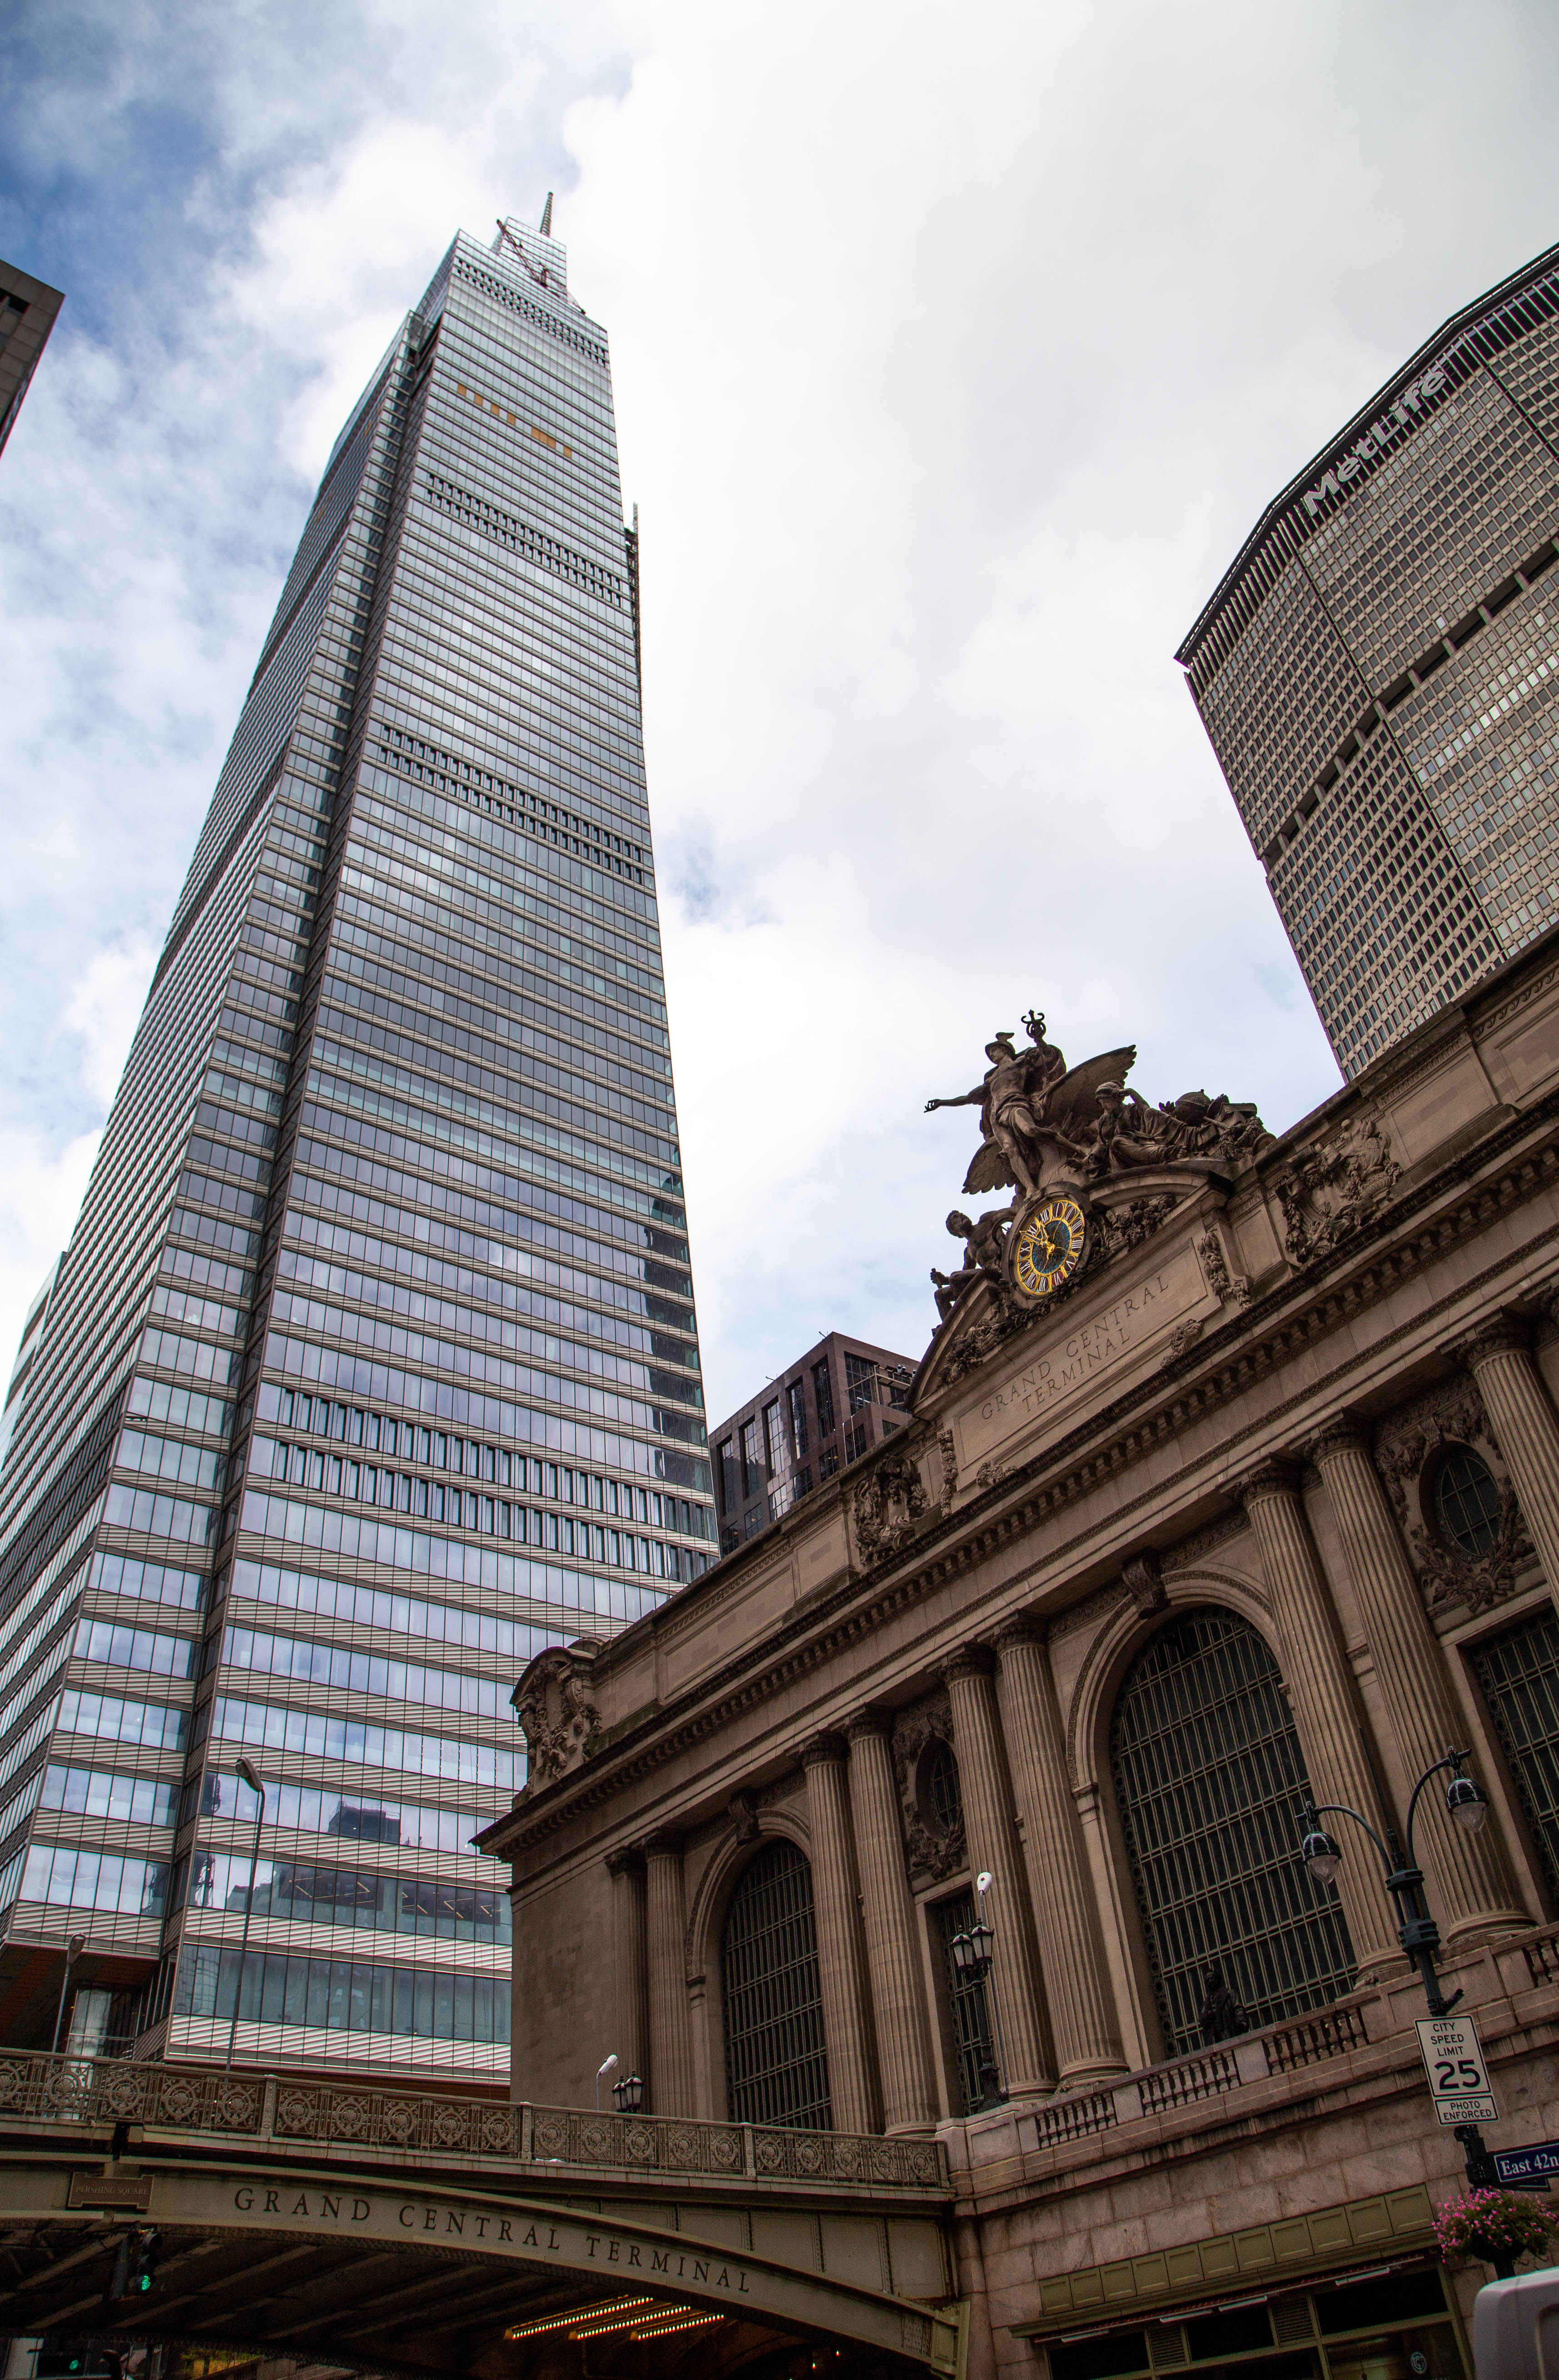 SL Green's One Vanderbilt dealt took nearly 20 years of planning to open — nearly getting derailed after a rezoning failed — but now it's opening during a global pandemic.